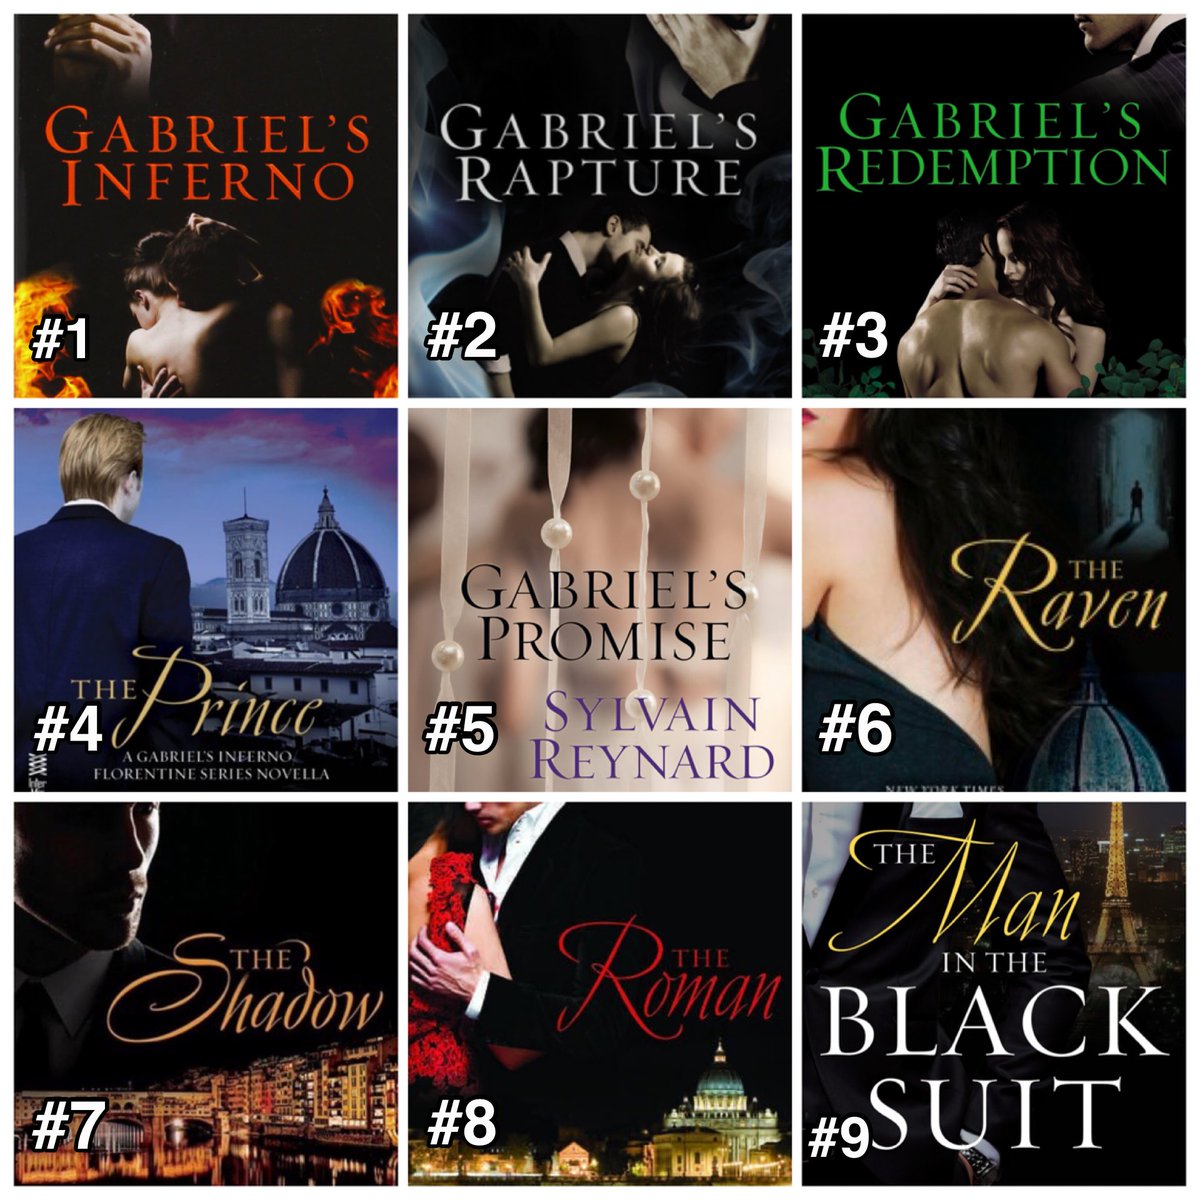 Are you new to @sylvainreynard’s novels? Welcome to a world of #Romance, #Redemption and #Mystery. 
Order of books:
1 #GabrielsInferno
2 #GabrielsRapture
3 #GabrielsRedemption
4 #ThePrince
5 #GabrielsPromise
6 #TheRaven
7 #TheShadow
8 #TheRoman
9 #TheManInTheBlackSuit